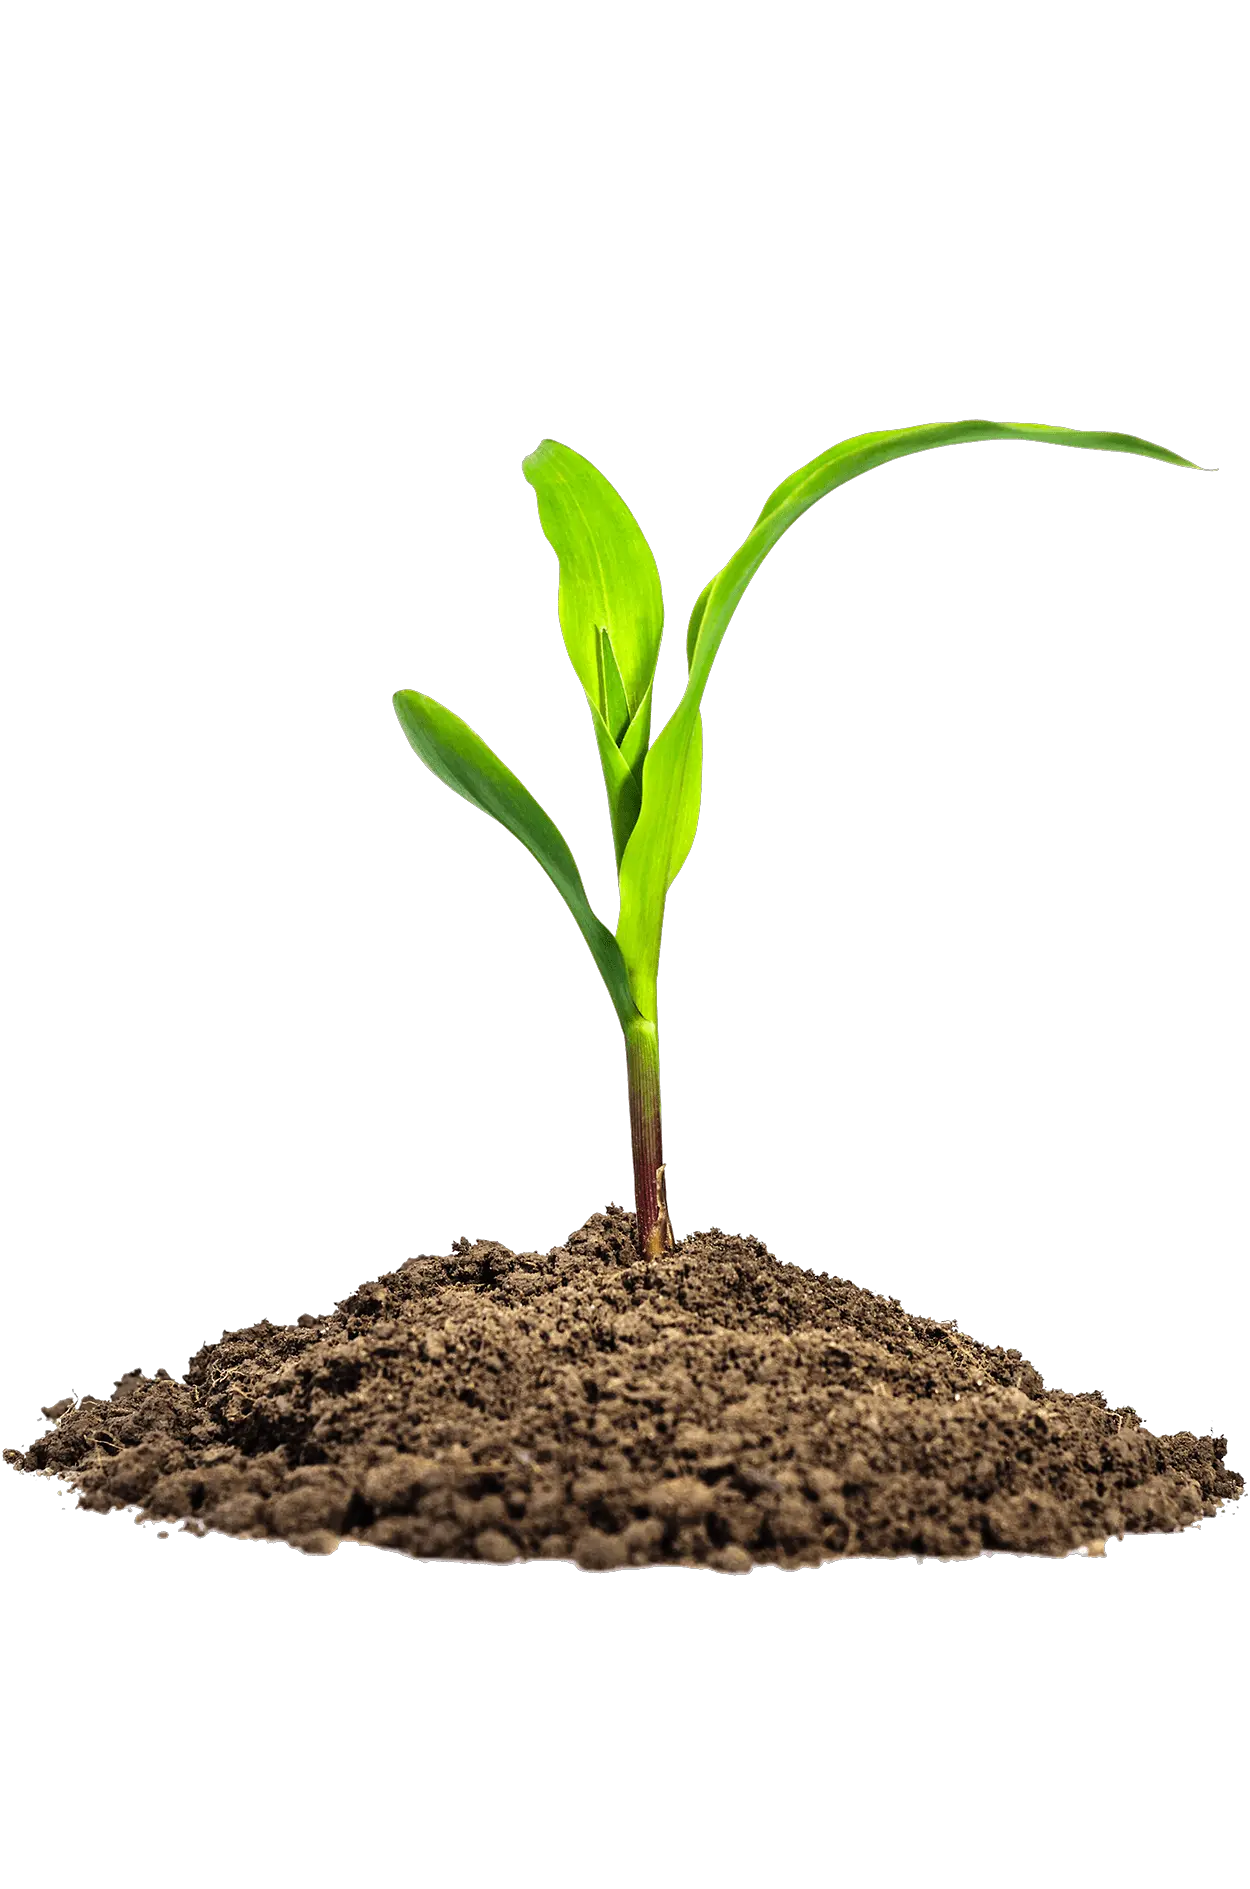 Leaves In Dirt Png Image Purepng Free Transparent Cc0 Maize Seedling Png Dirt Transparent Background